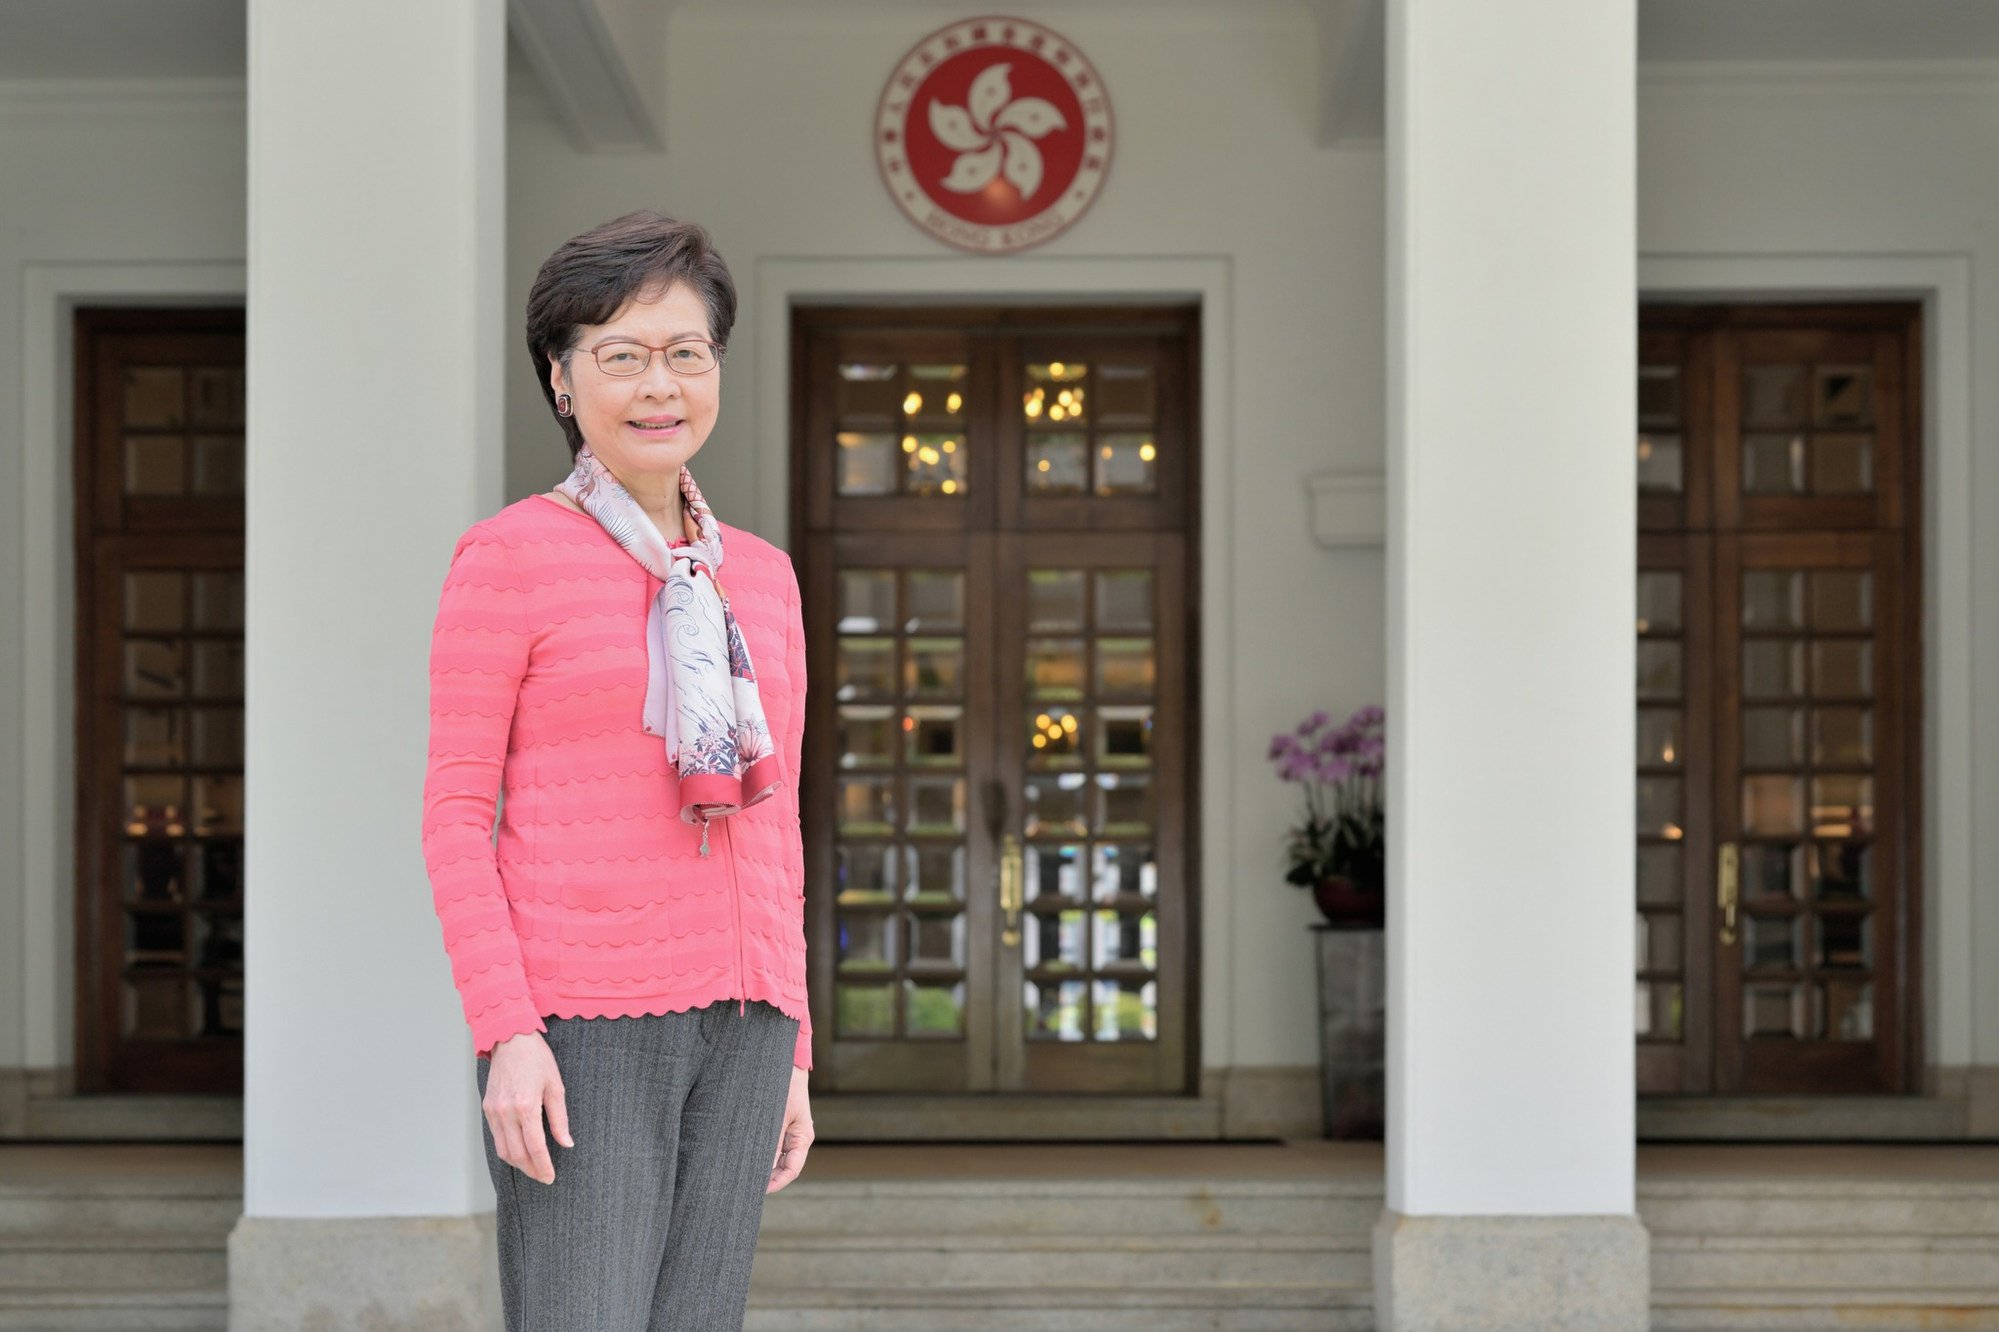 Carrie Lam is expected to travel to Beijing in July after her tenure ends to spend some time sightseeing. Photo: Facebook